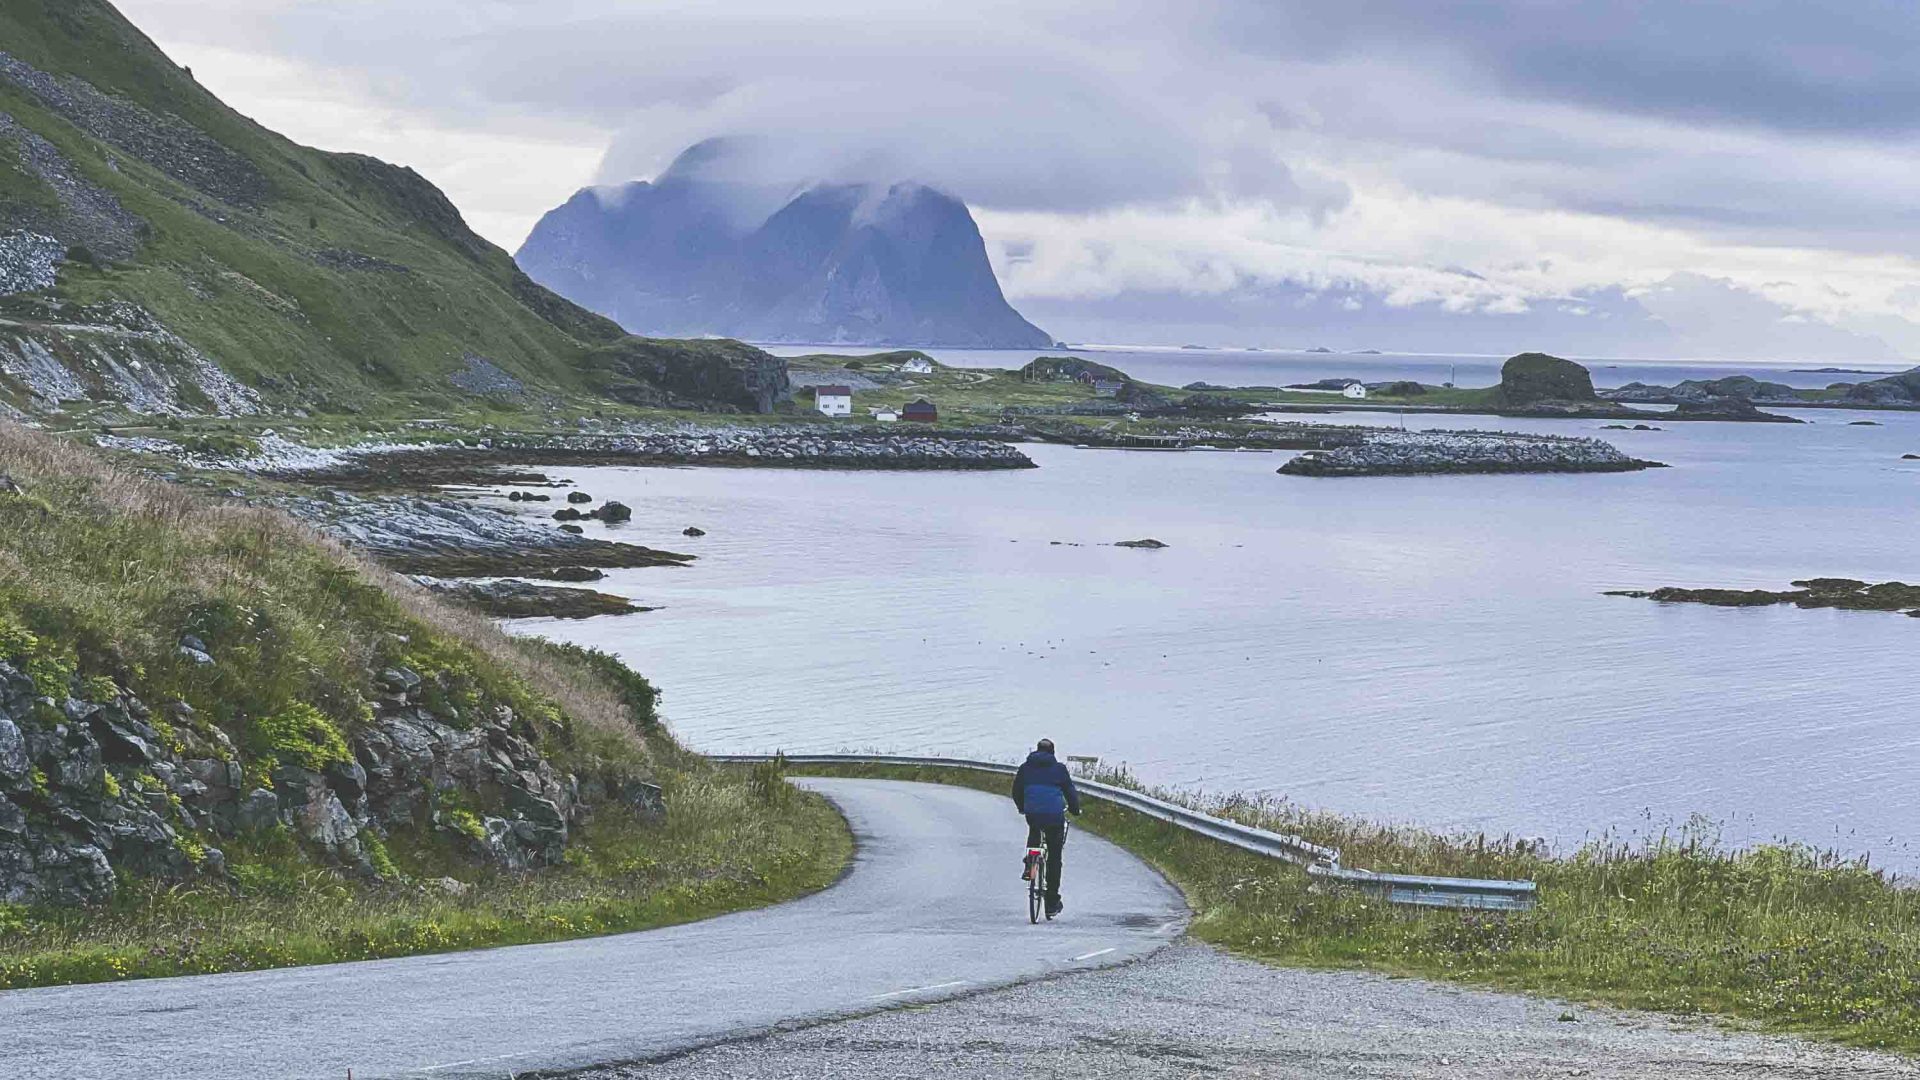 A person cycles down a road that has cliffs jutting out of the water below.